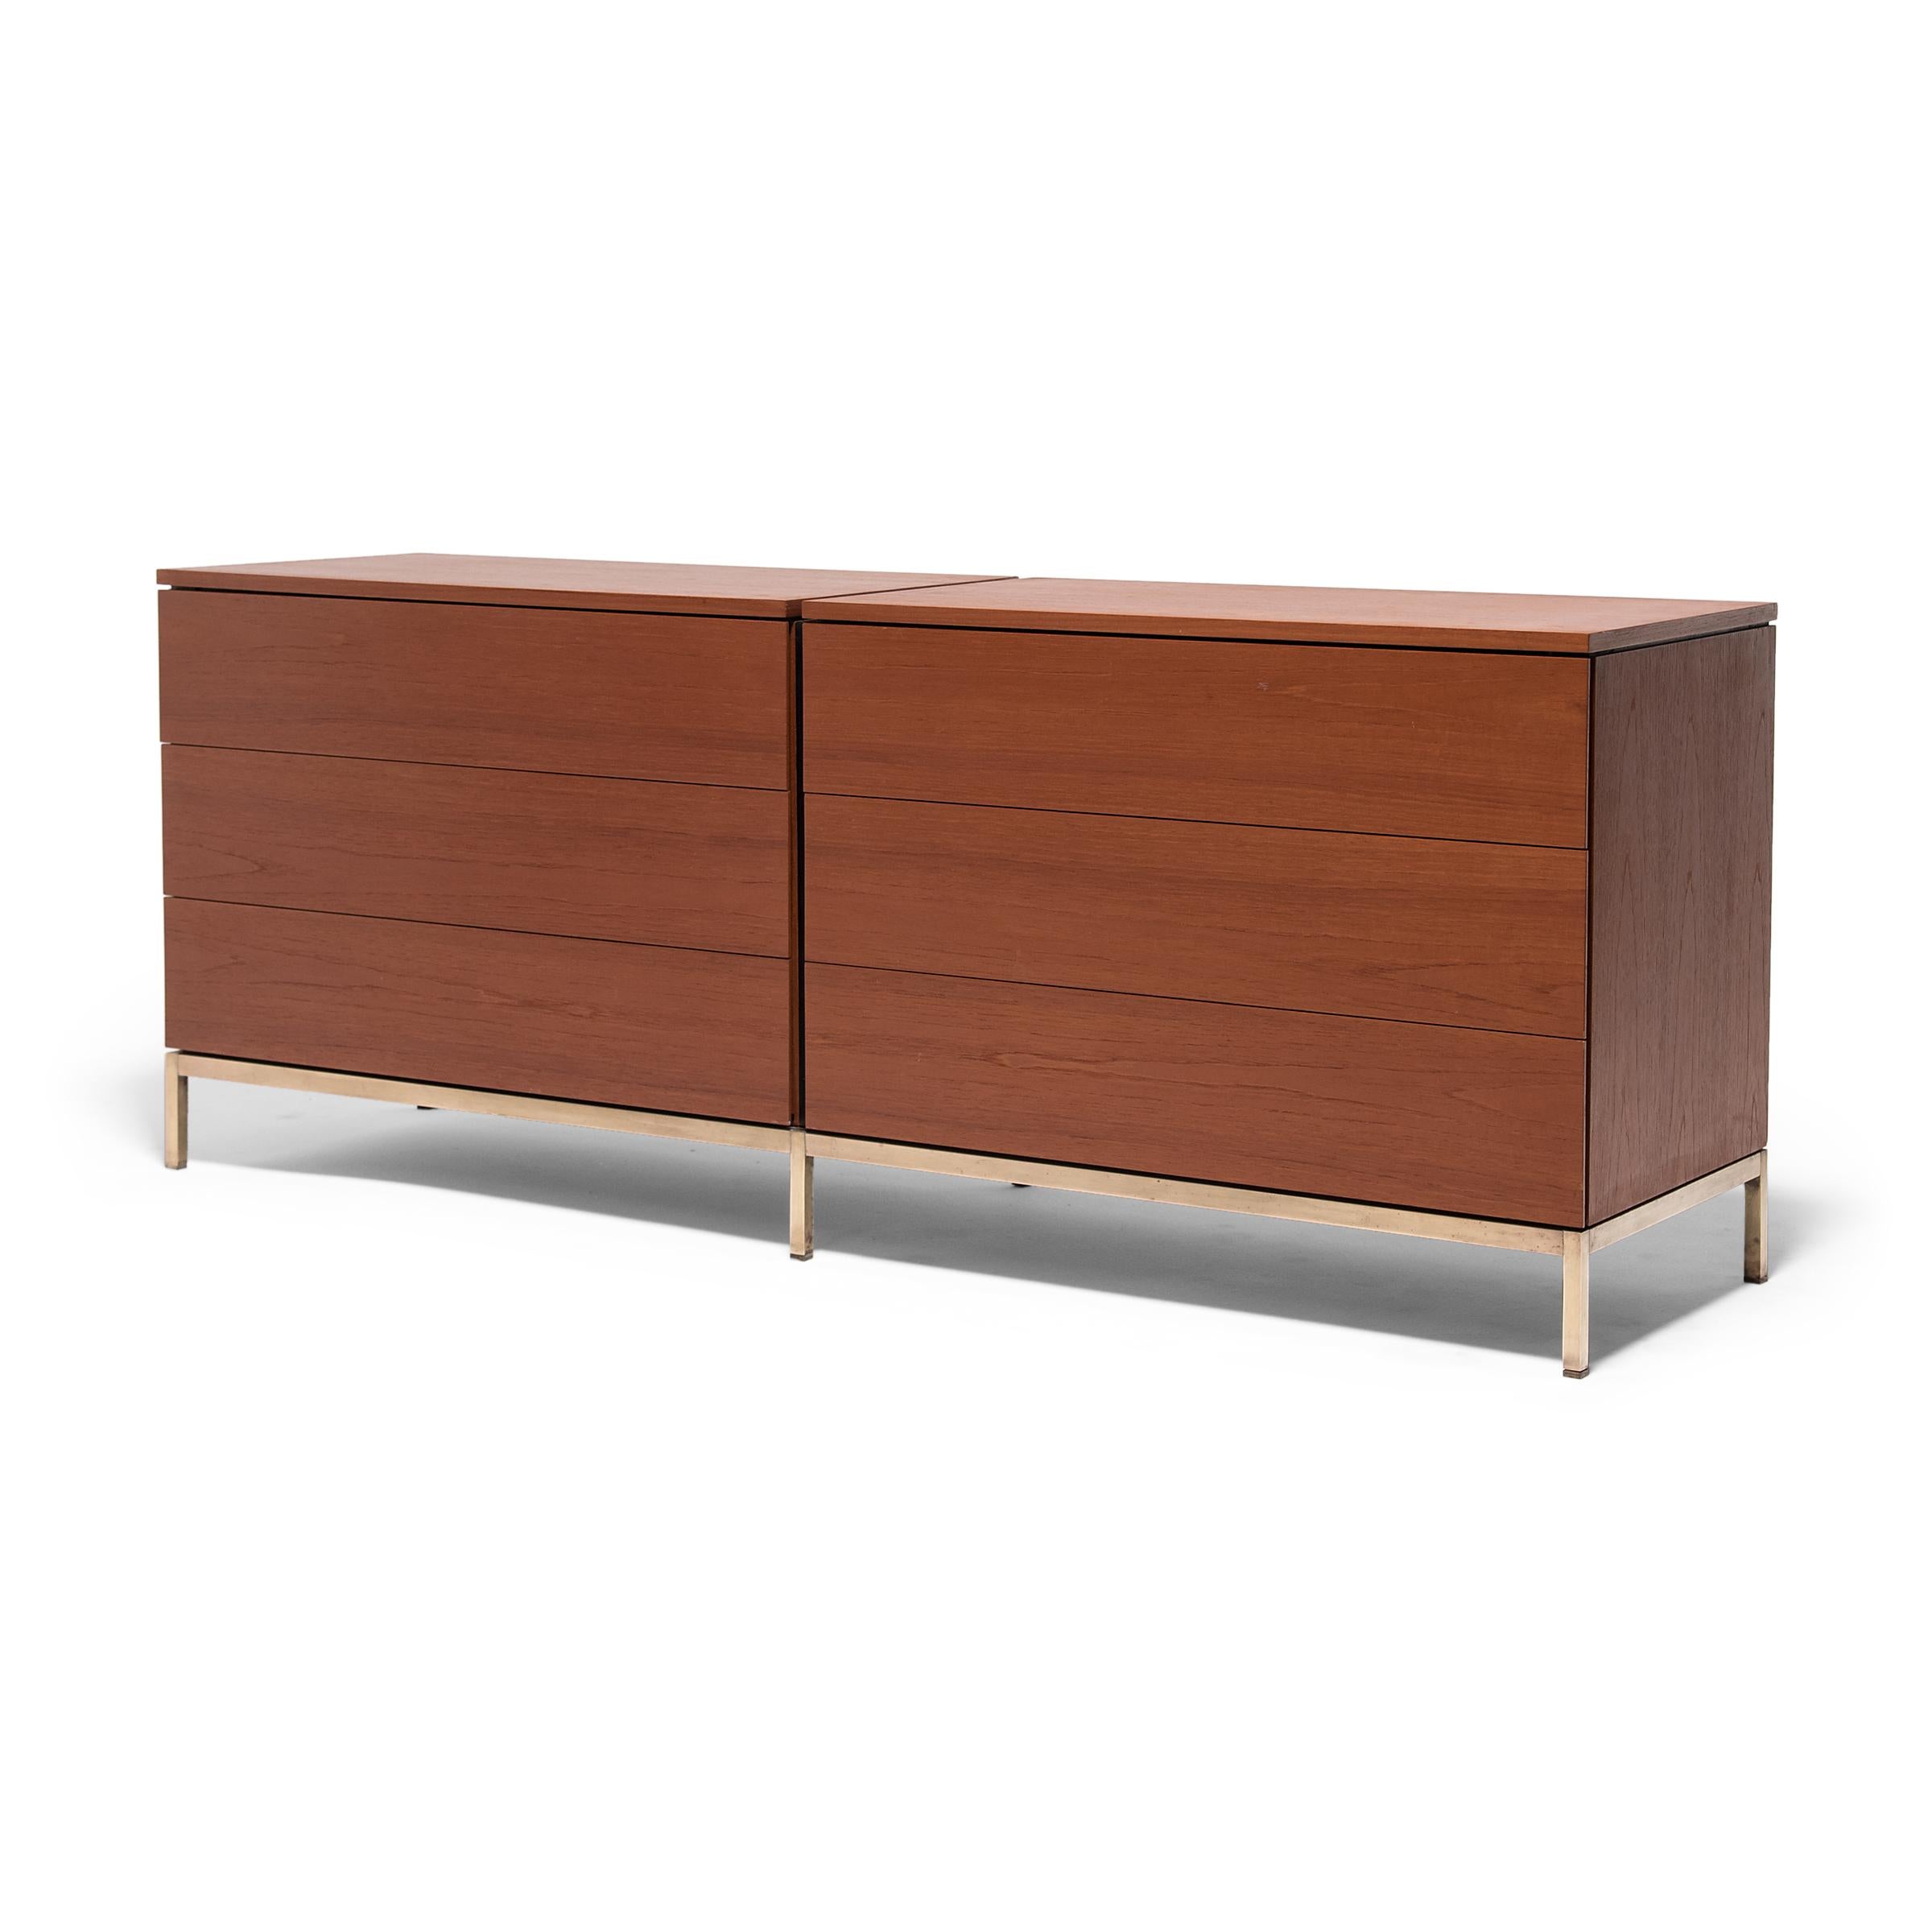 Elevated by a brass metal base, this double chest of drawers by iconic designer Florence Knoll for Knoll International epitomizes midcentury furniture design. Guided by functionality, the credenza's seamless form is fitted with six wide drawers and